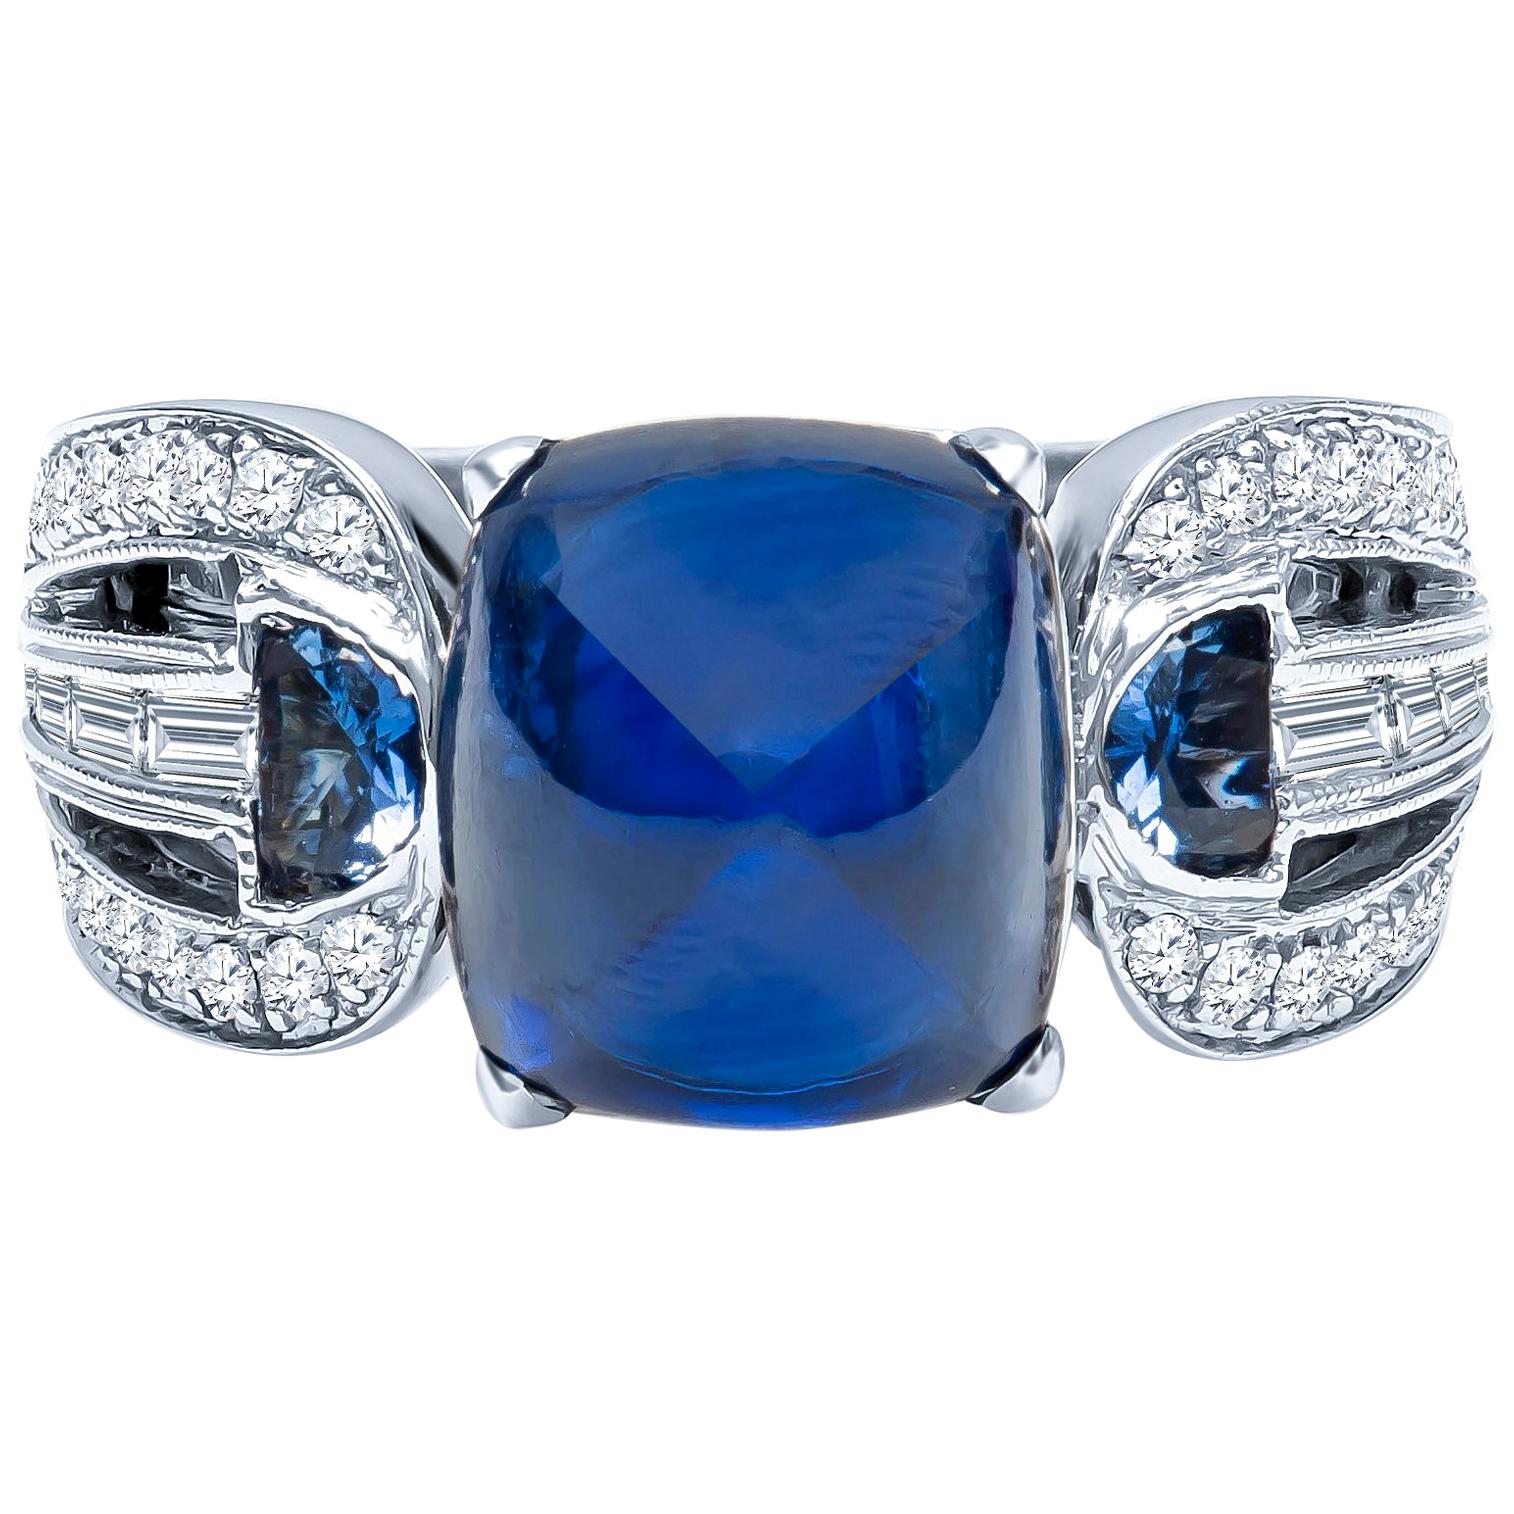 9.06 Carat Sugarloaf Cabochon Natural Blue Sapphire Ring with Diamond Accents